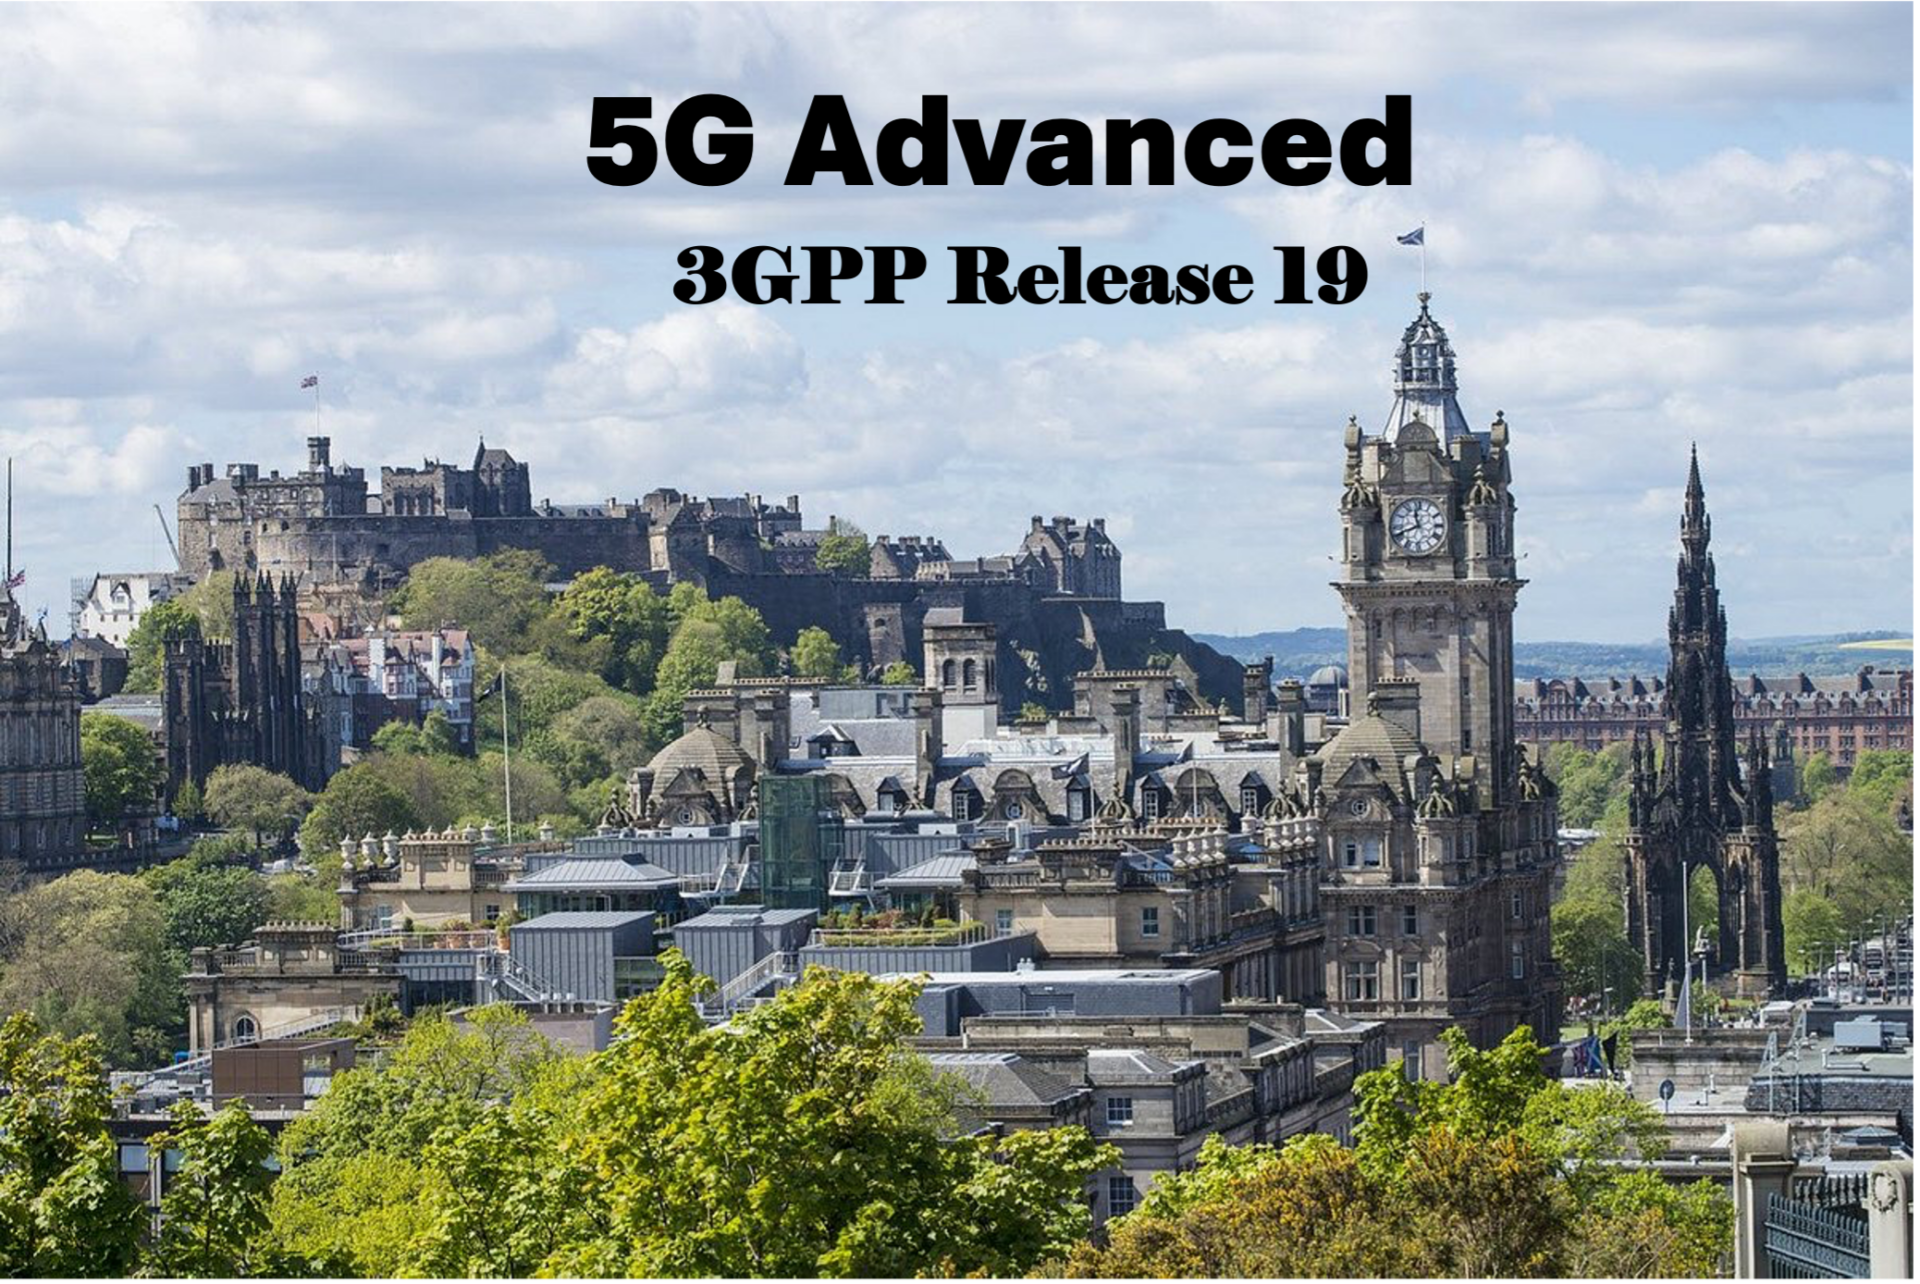 3GPP’s Release 19 Continues 5G Advanced Standardization, Sets The Stage For 6G